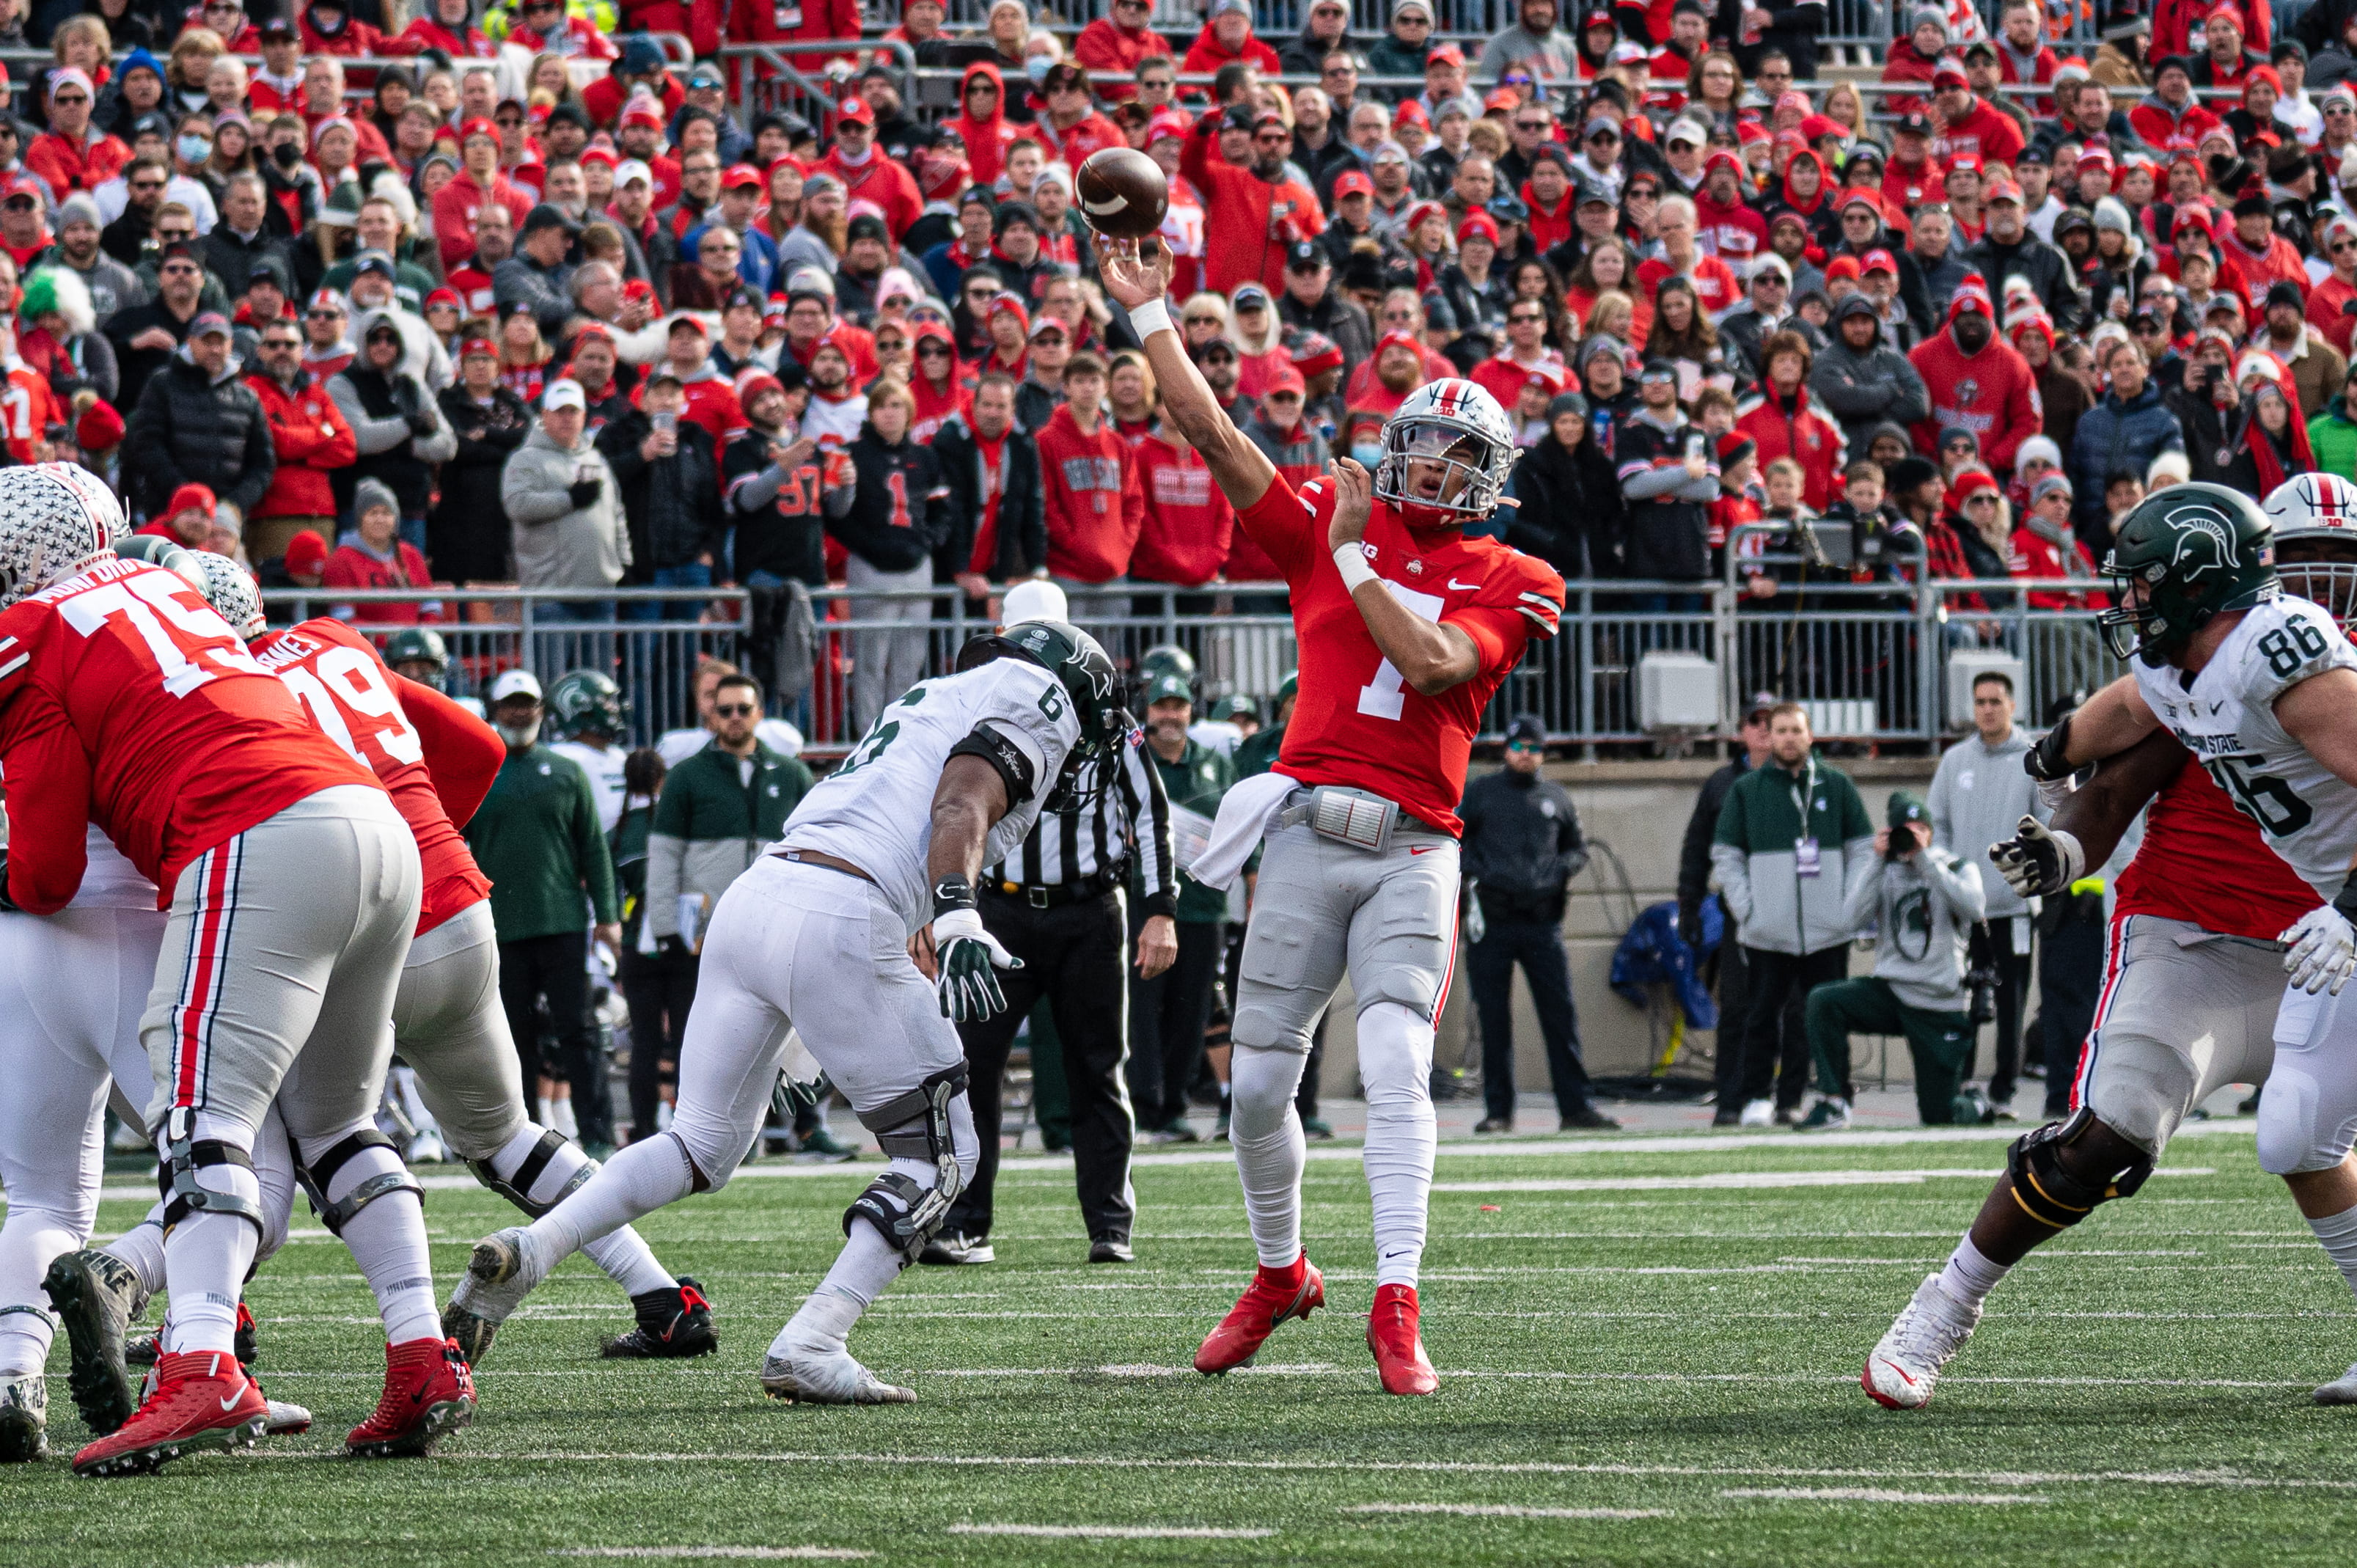 Football: Five takeaways from No. 4 Ohio State’s 56-7 victory against No. 7 Michigan State